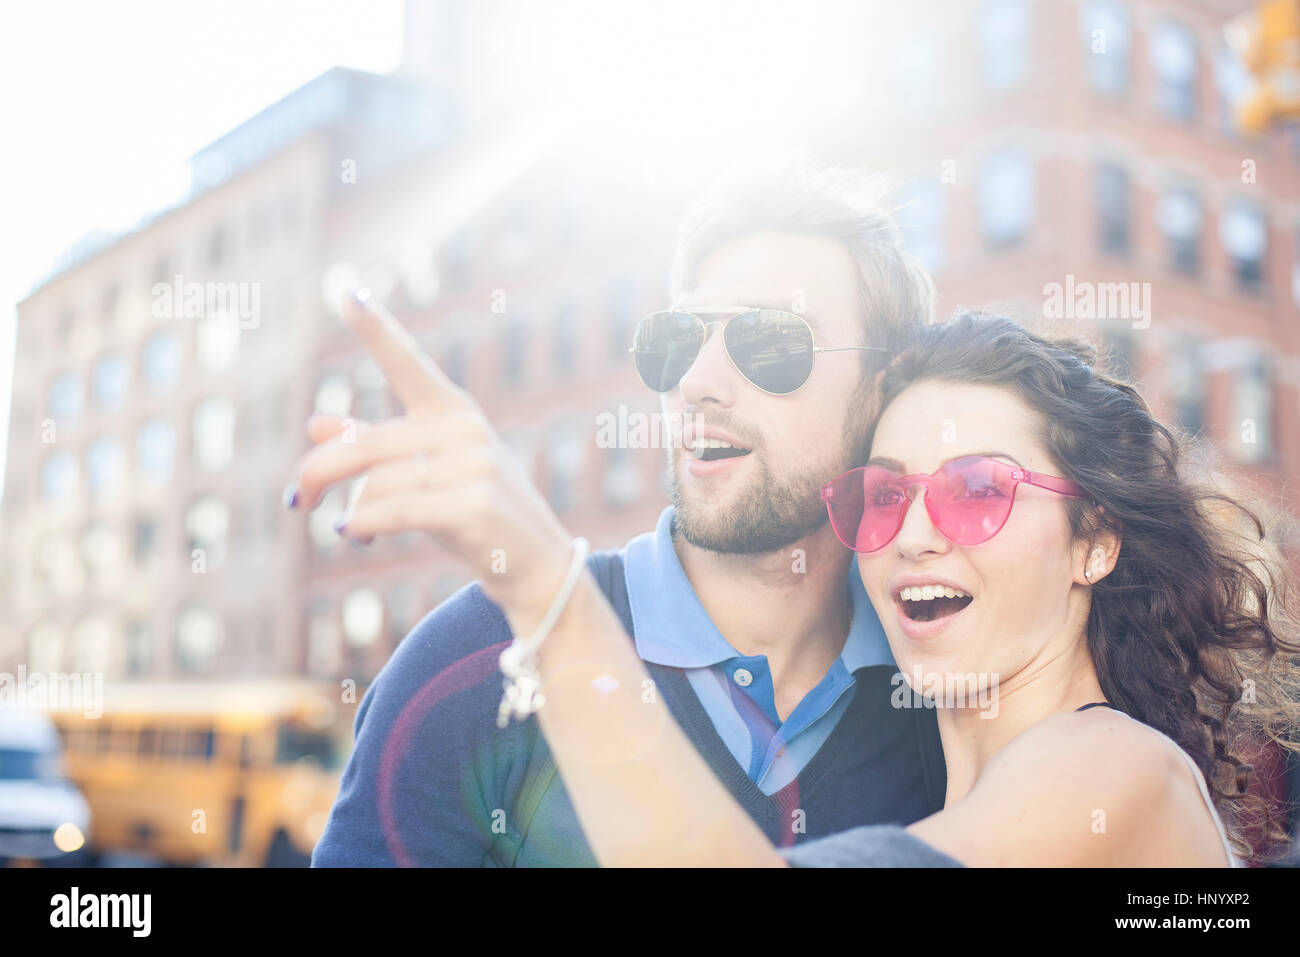 Couple sightseeing together Stock Photo